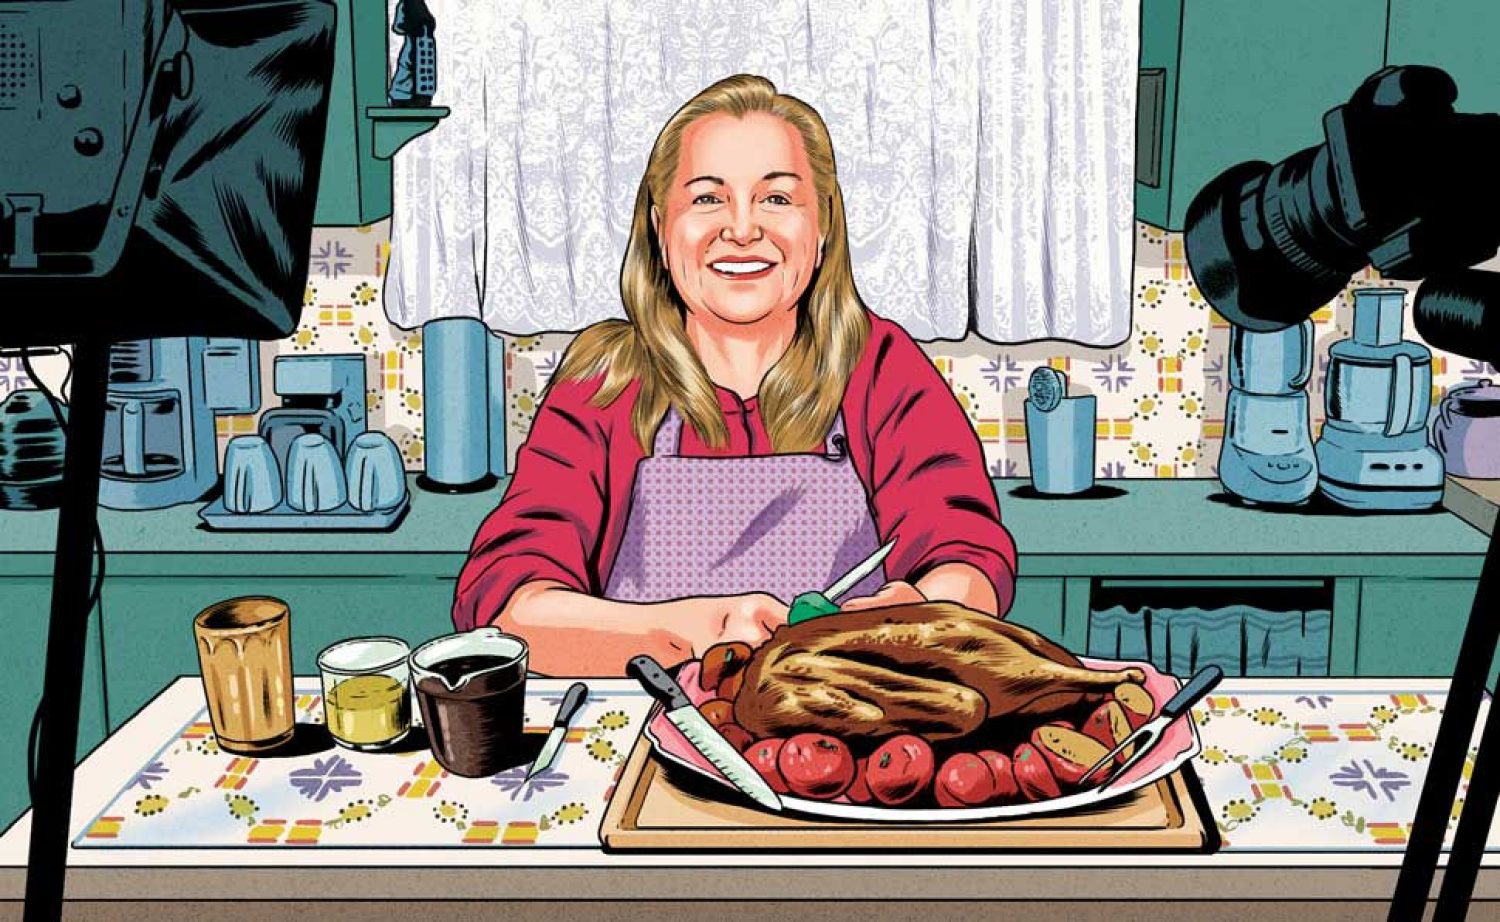 Illustration of Mary Shrader flanked by video equipment preparing a meal in her home kitchen.